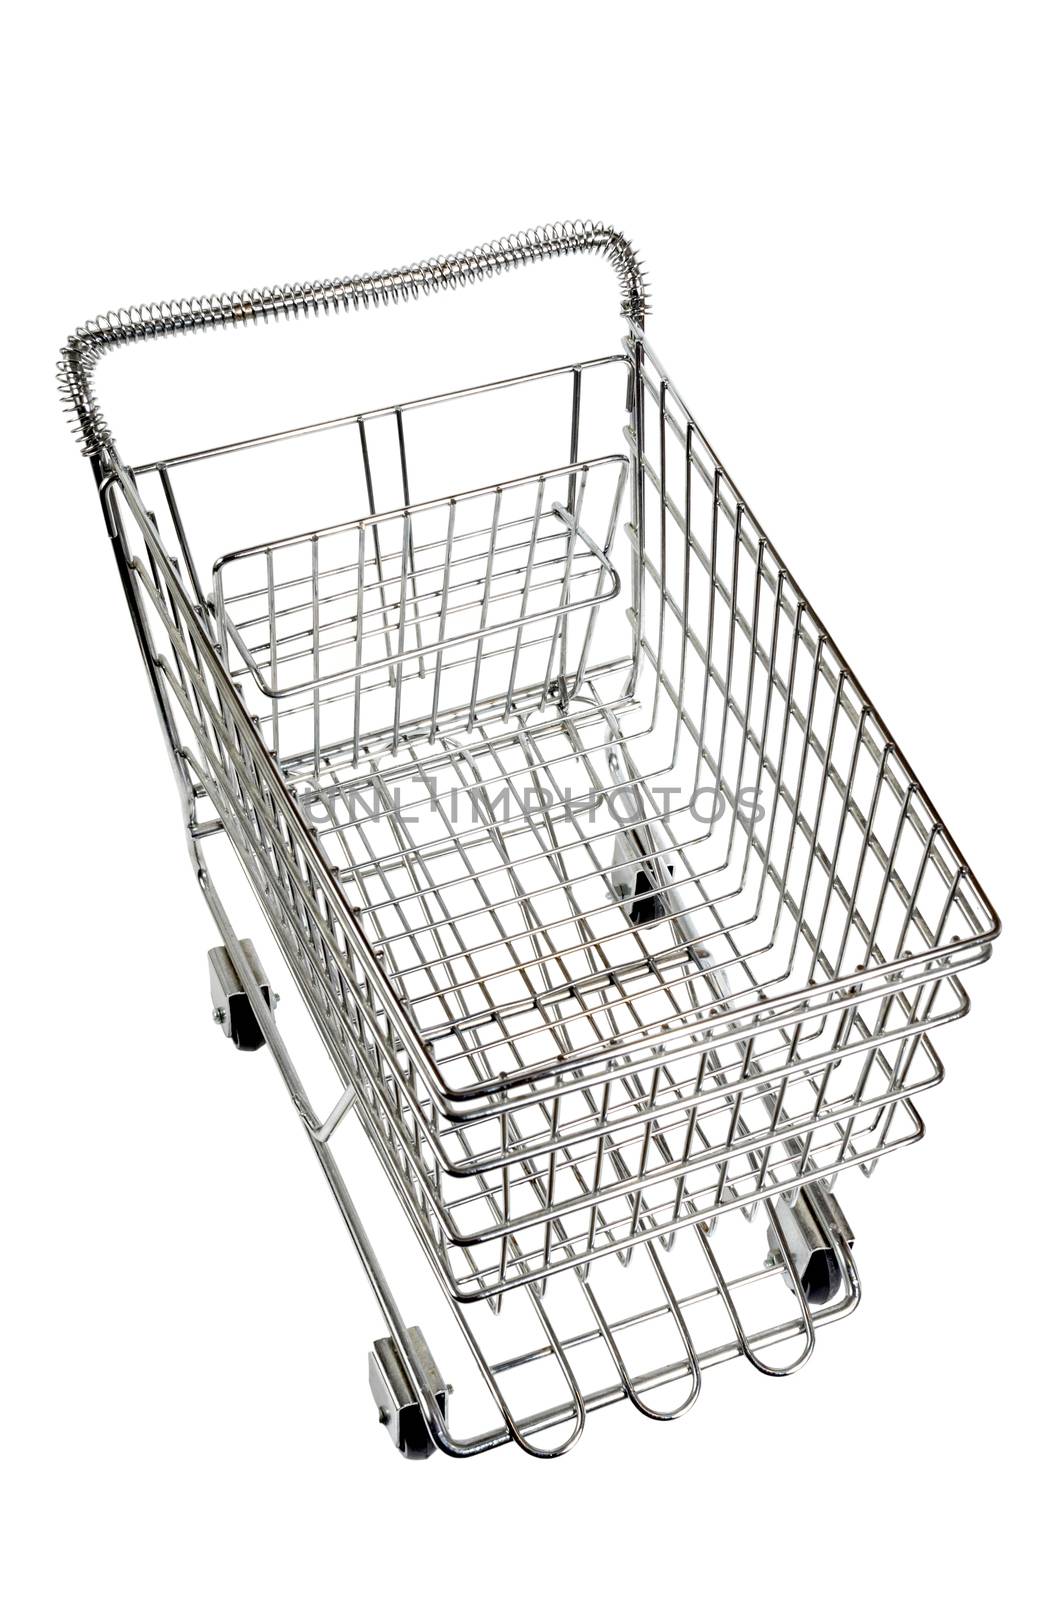 Shopping cart over view isolated on white.